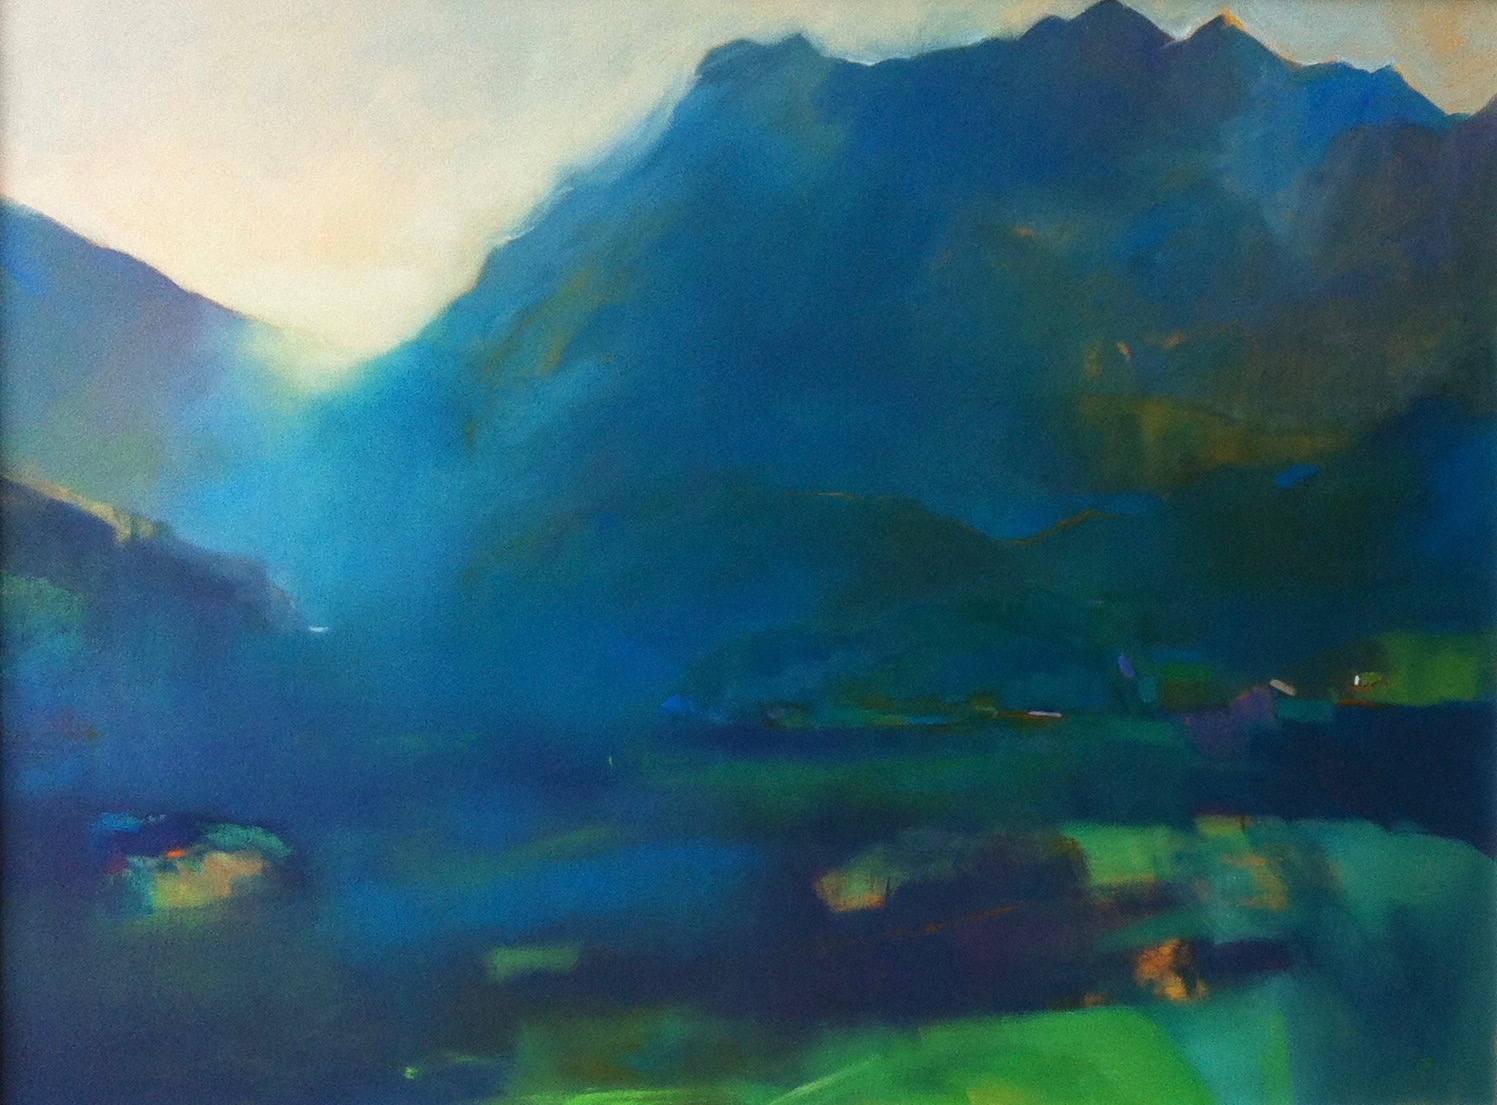 Painting of hills in blues and green